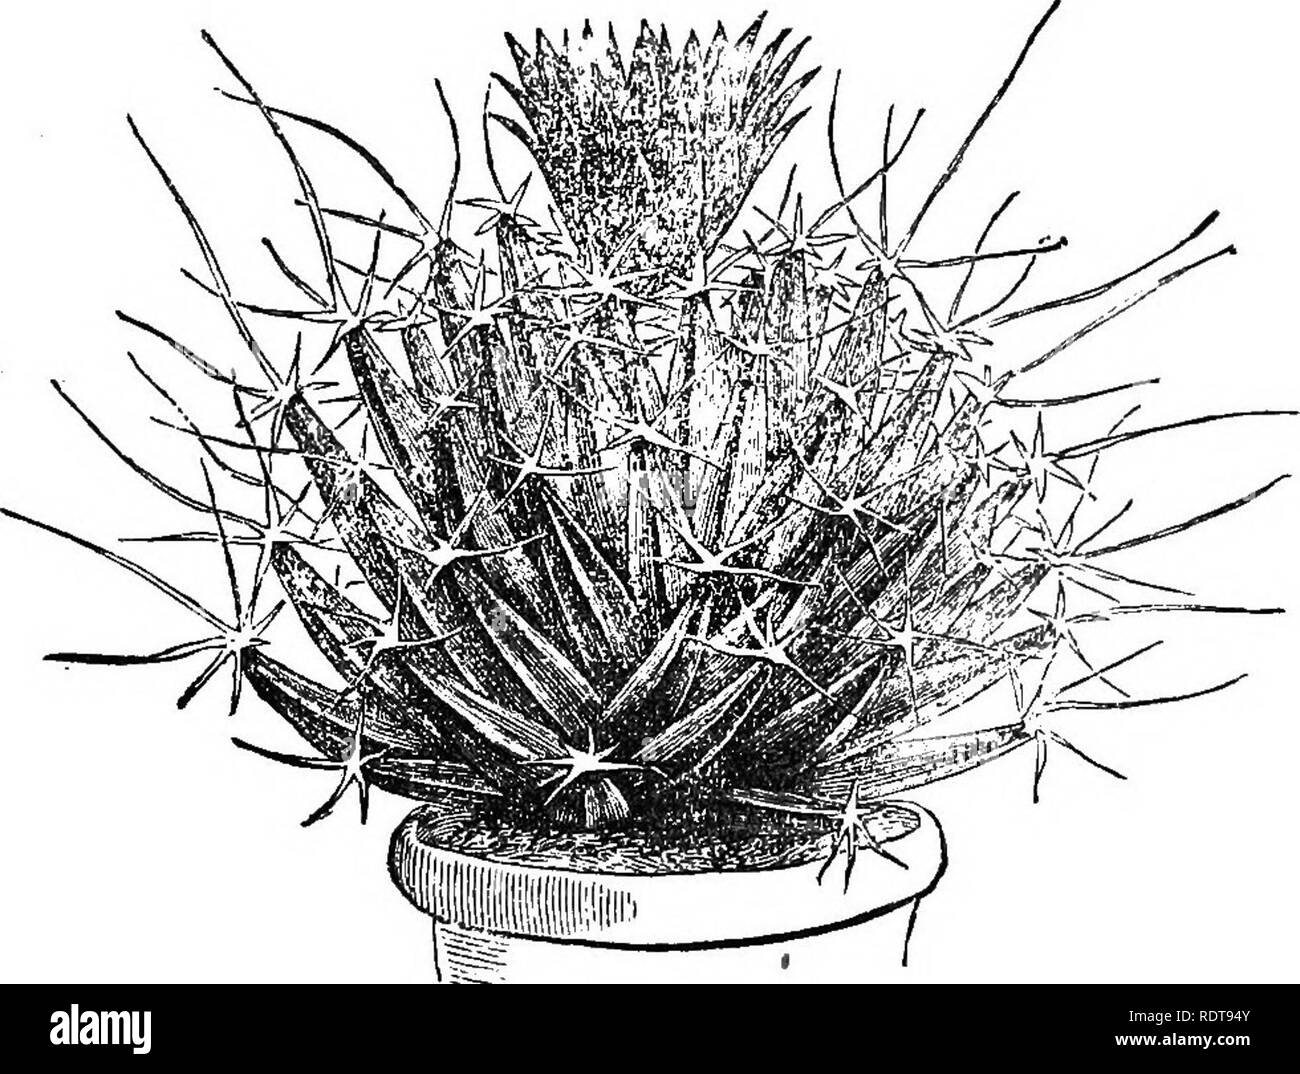 . Cactaceous plants: their history and culture. Cactus. LEtrOHIENBEEGIA. 29 Helwingia and Erythrochiton. Lemaire partly adopted thia 7iew regarding the mammae of the three genera Mamillaria, Pelecyphora, and Leuchtenbergia as metamorphosed leaves, the spines representing the veins of the leaves, in which opinion many careful observers agree. Le Maout and Decaisne describe them as &quot; arrested buds,&quot; and would thus give them more the nature of branches, while others incline to the view that they are simple elevations of the substance of the stem similar to the ridges in Echinocactus and Stock Photo